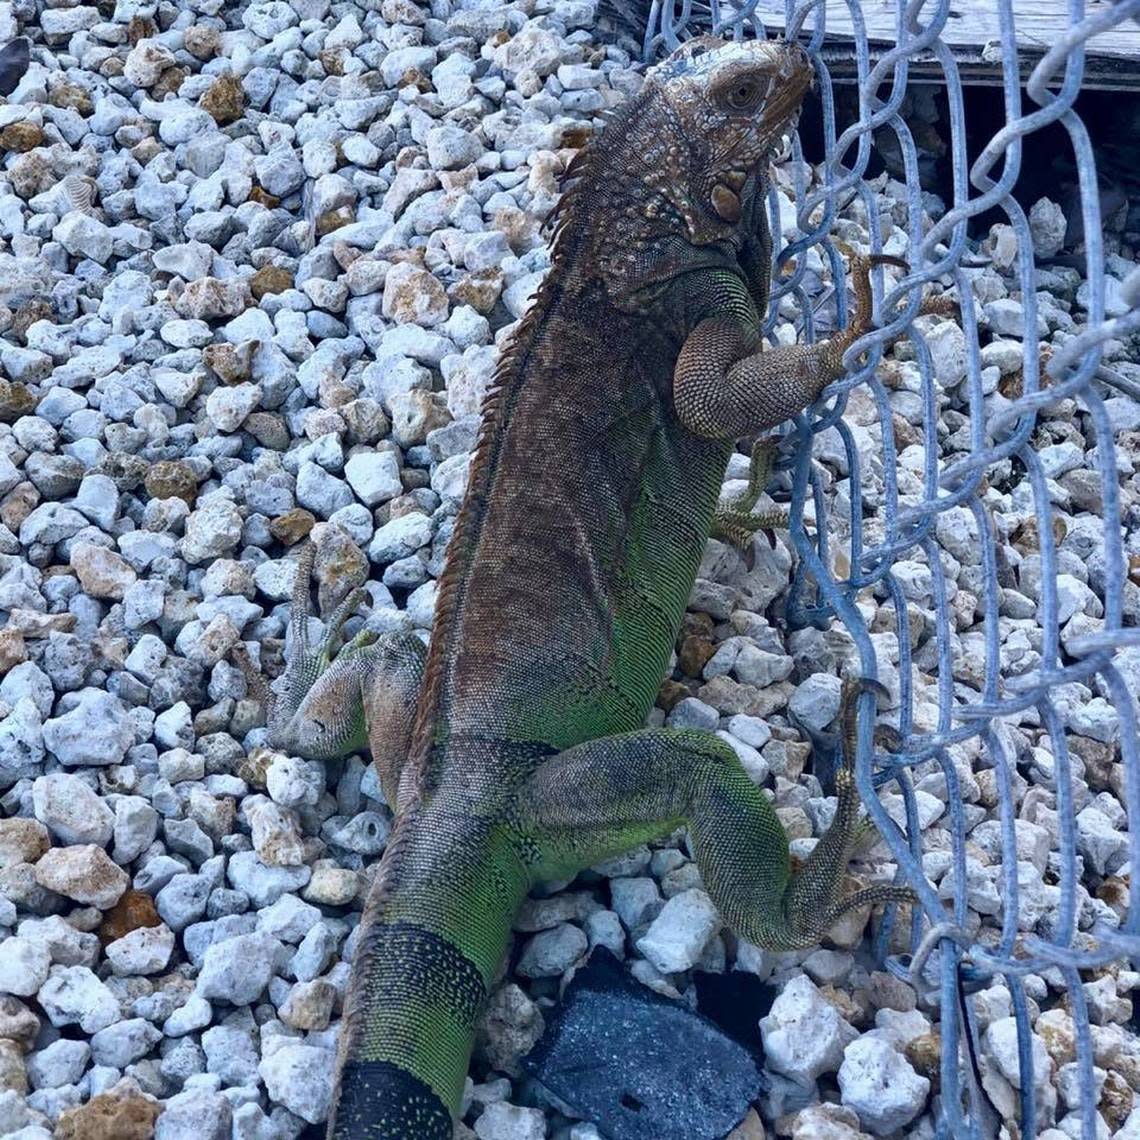 This iguana was the culprit in causing a power outage in Key West on Monday, Dec. 17, 2018.